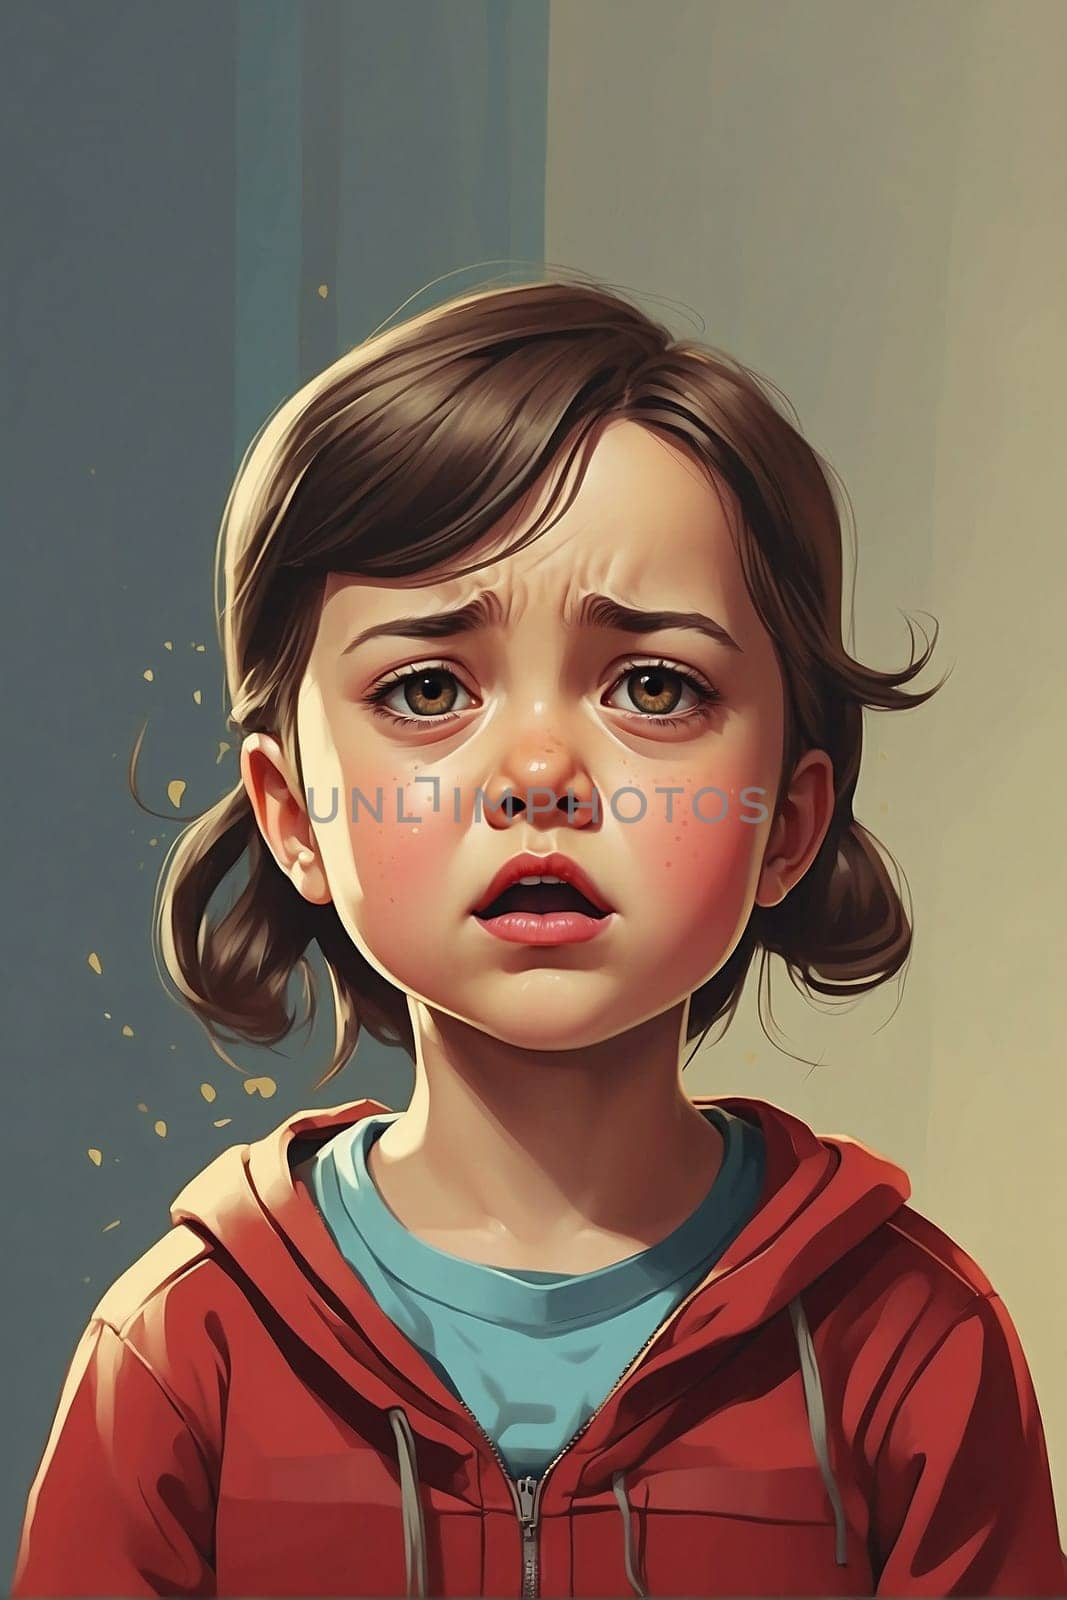 A lively and captivating painting depicting a young girl wearing a red hoodie, showcasing her joyful and carefree spirit.